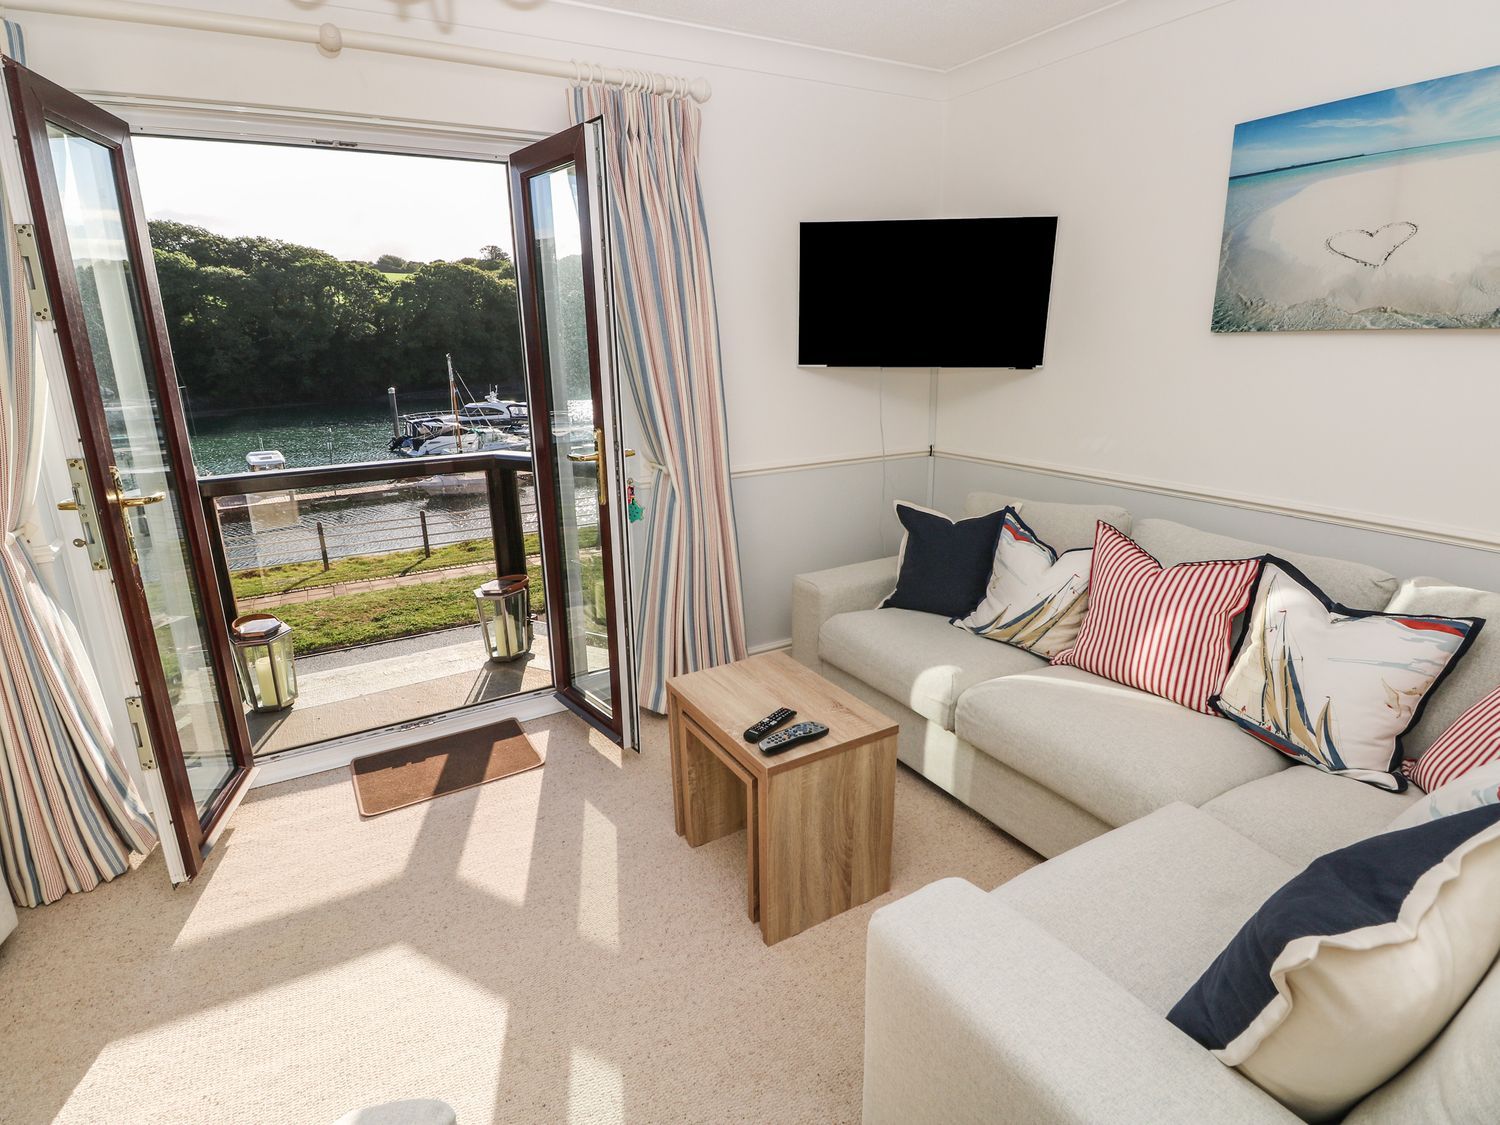 Yacht Haven View - South Wales - 1120433 - photo 1